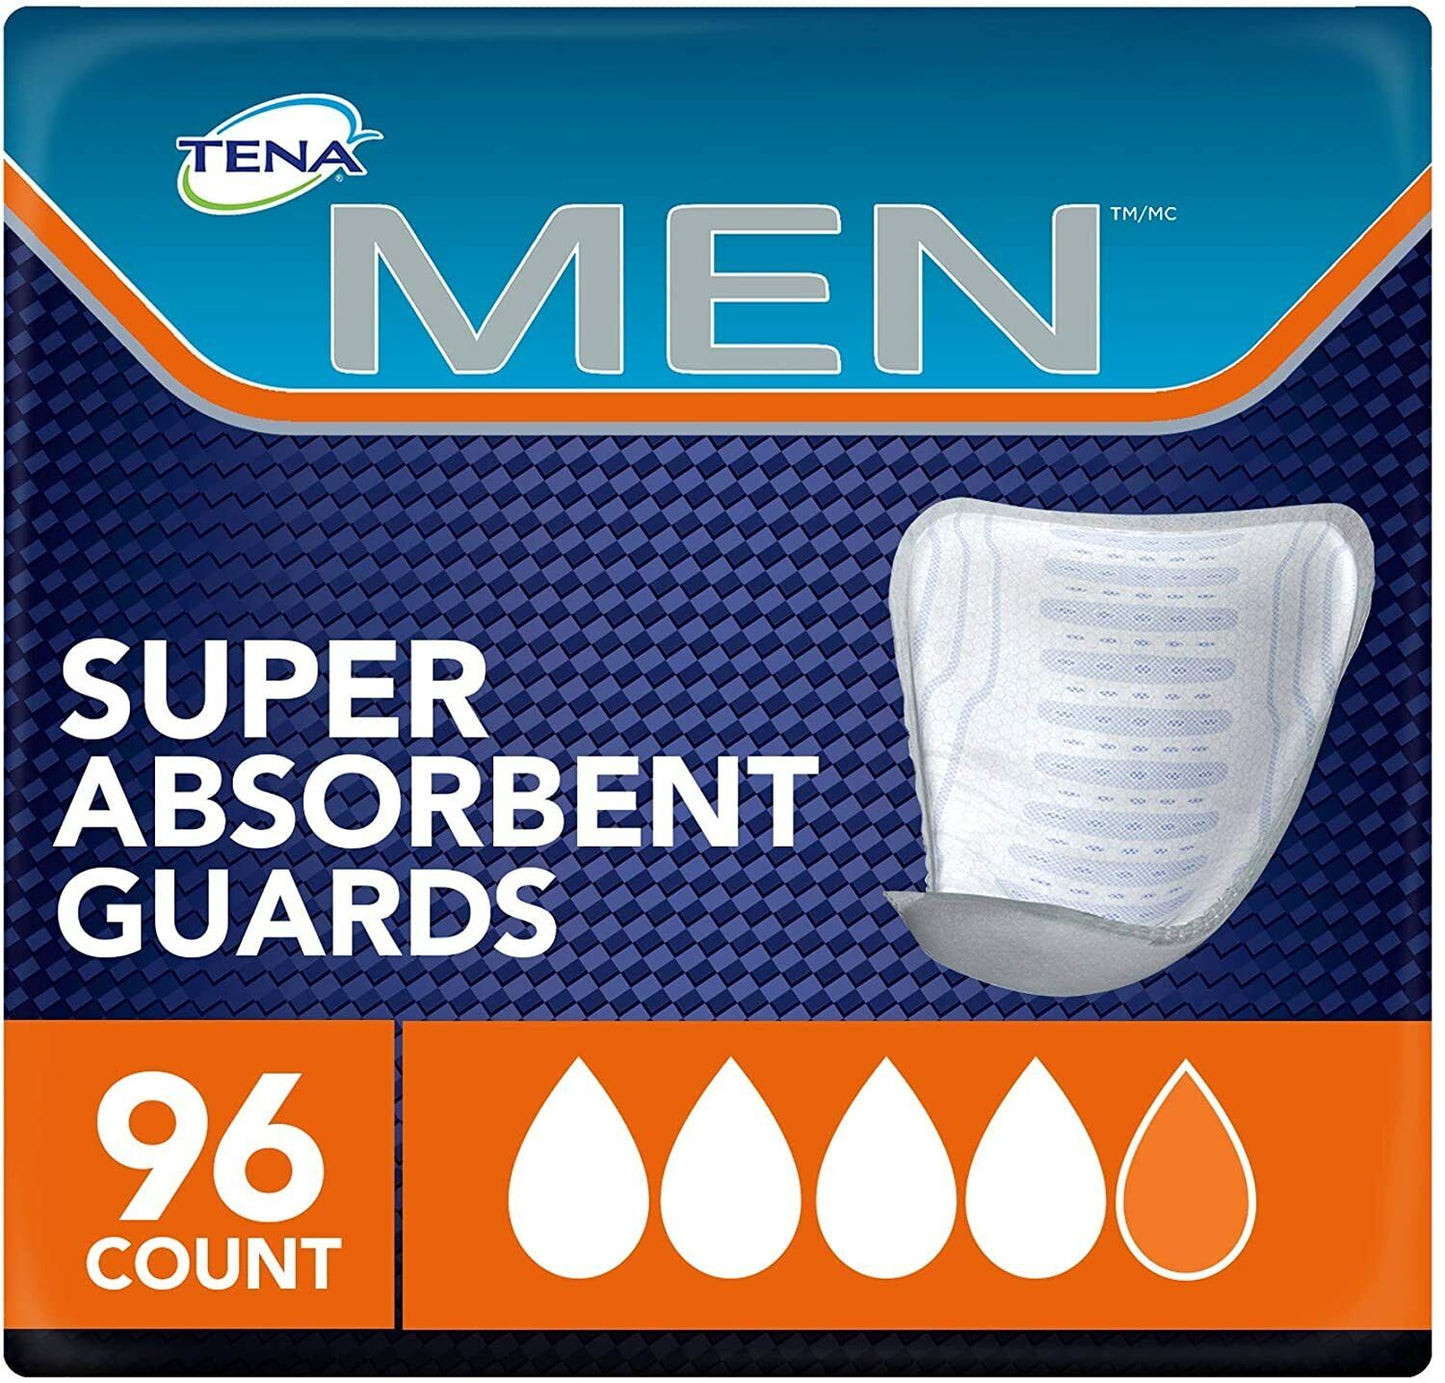 Tena Incontinence Guards for Men, Moderate / Super Absorbency 96, 112, 144 ct